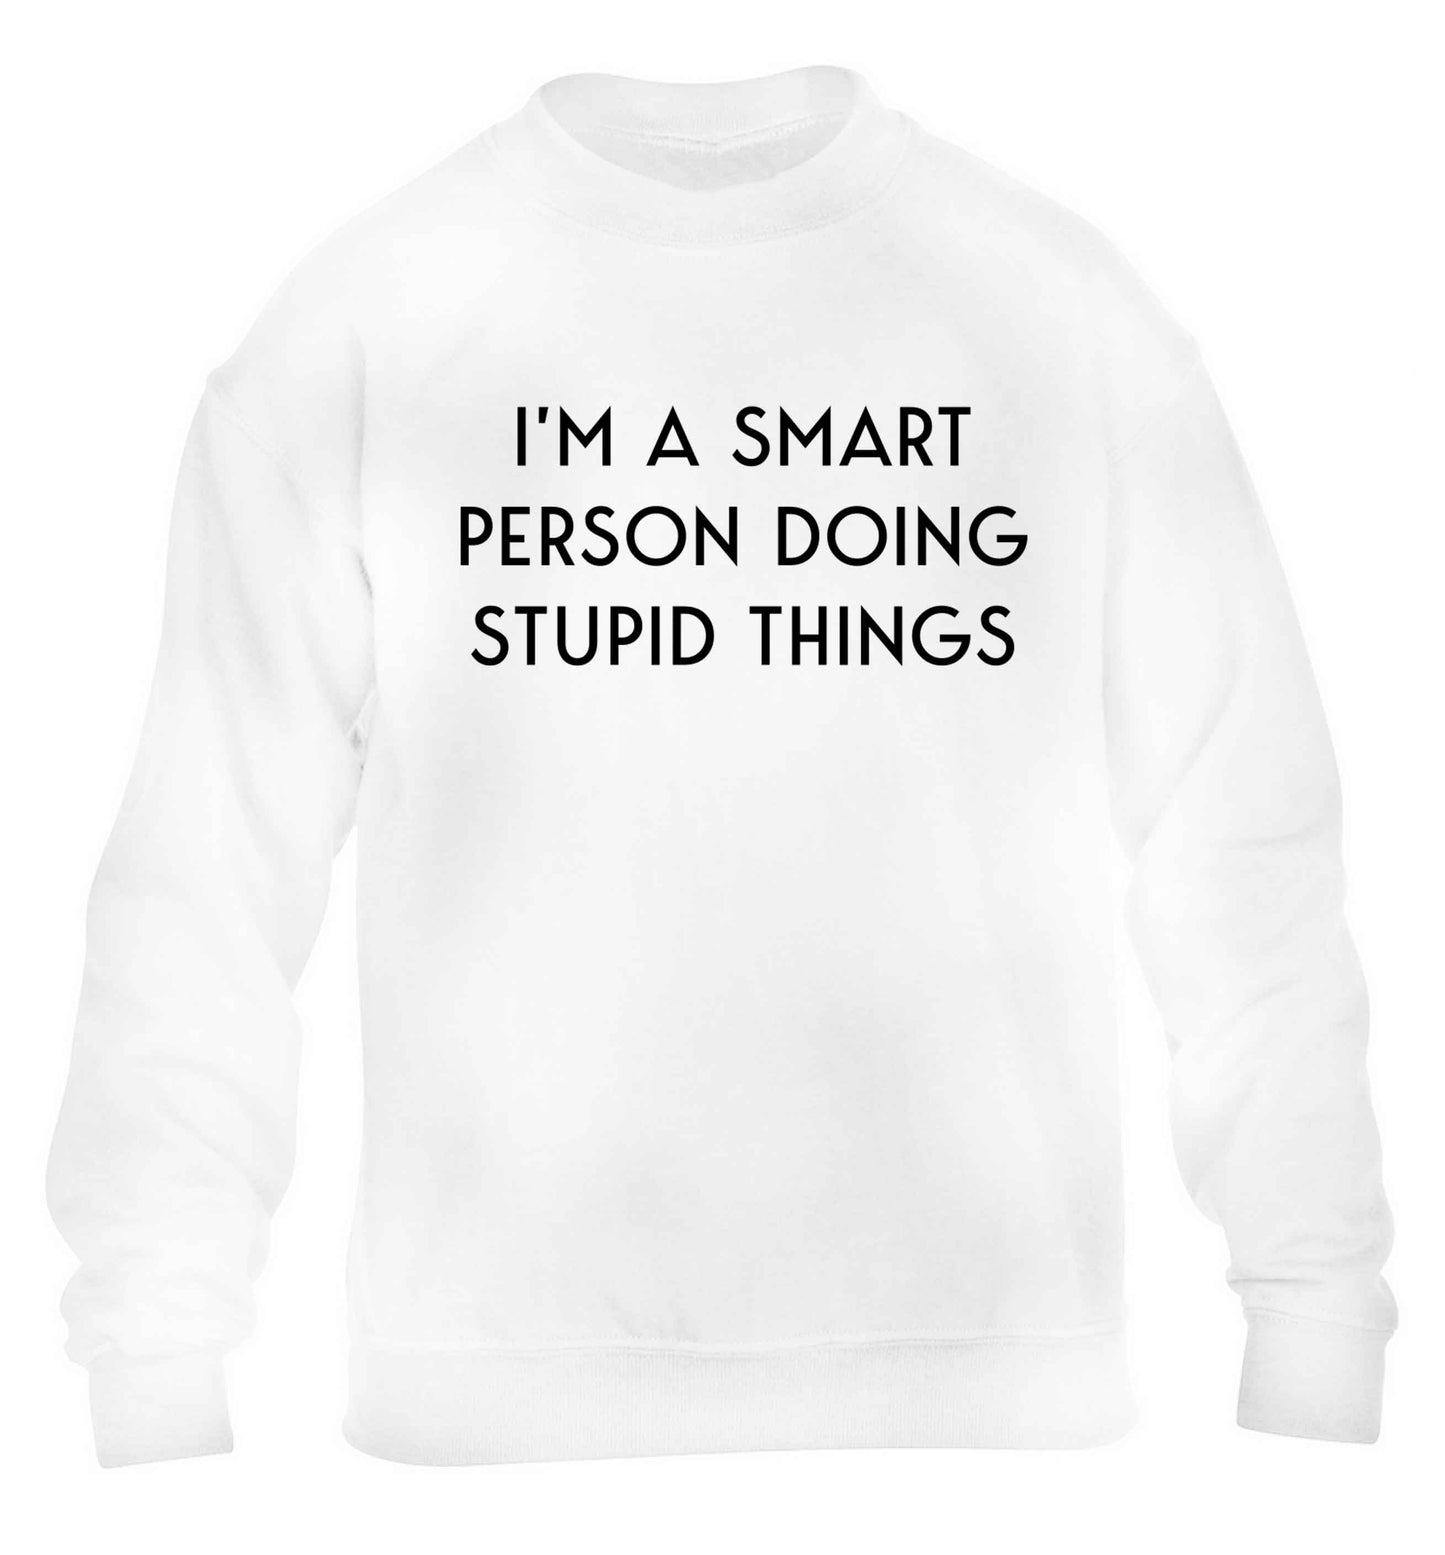 I'm a smart person doing stupid things children's white sweater 12-13 Years